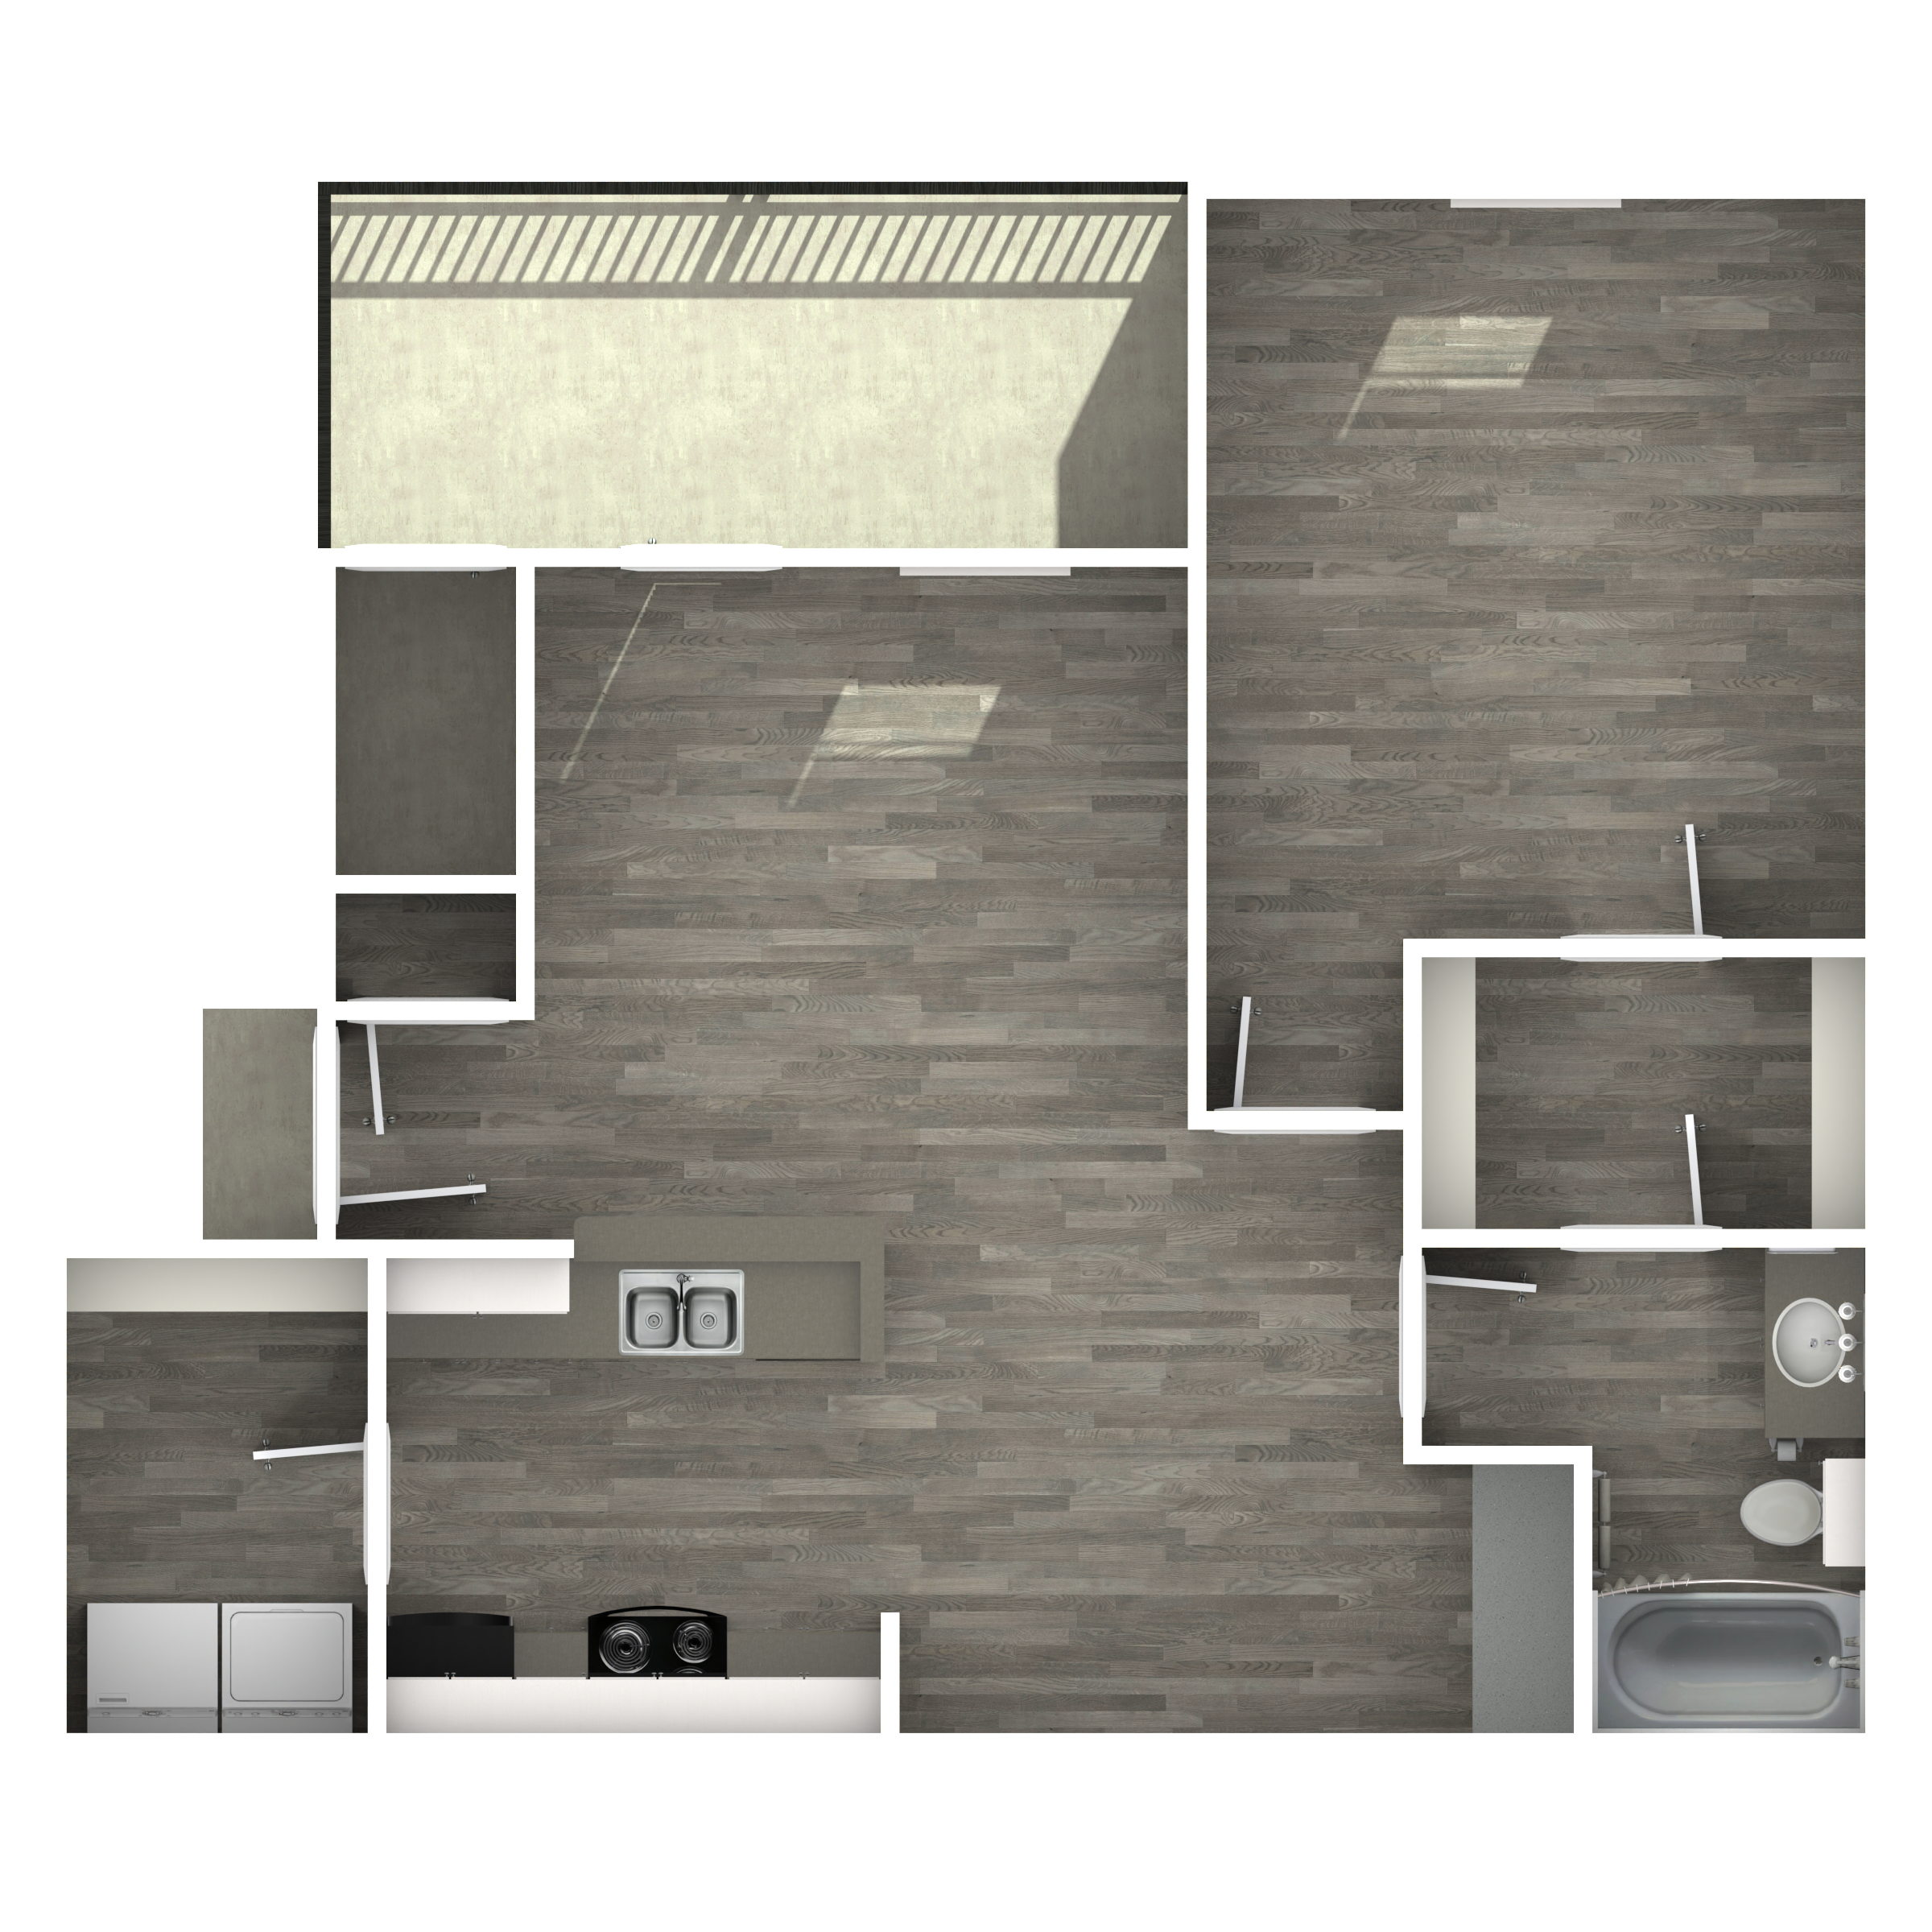 A3_740_renovated-Unfurnished.png